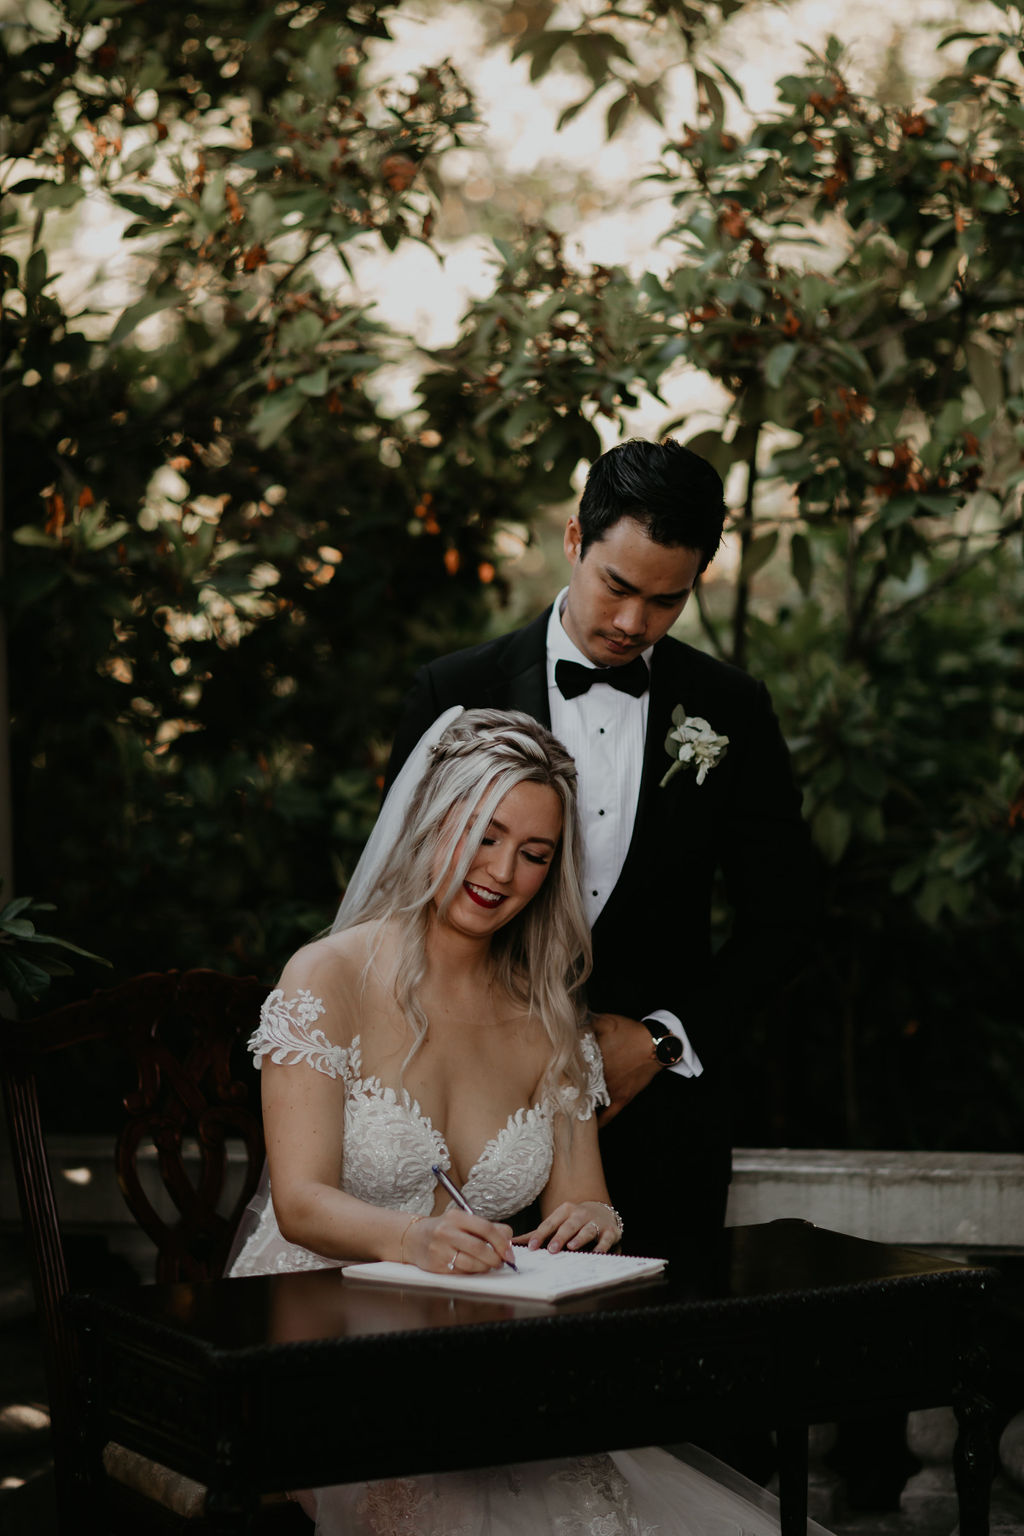 signing your marriage licence at your wedding ceremony